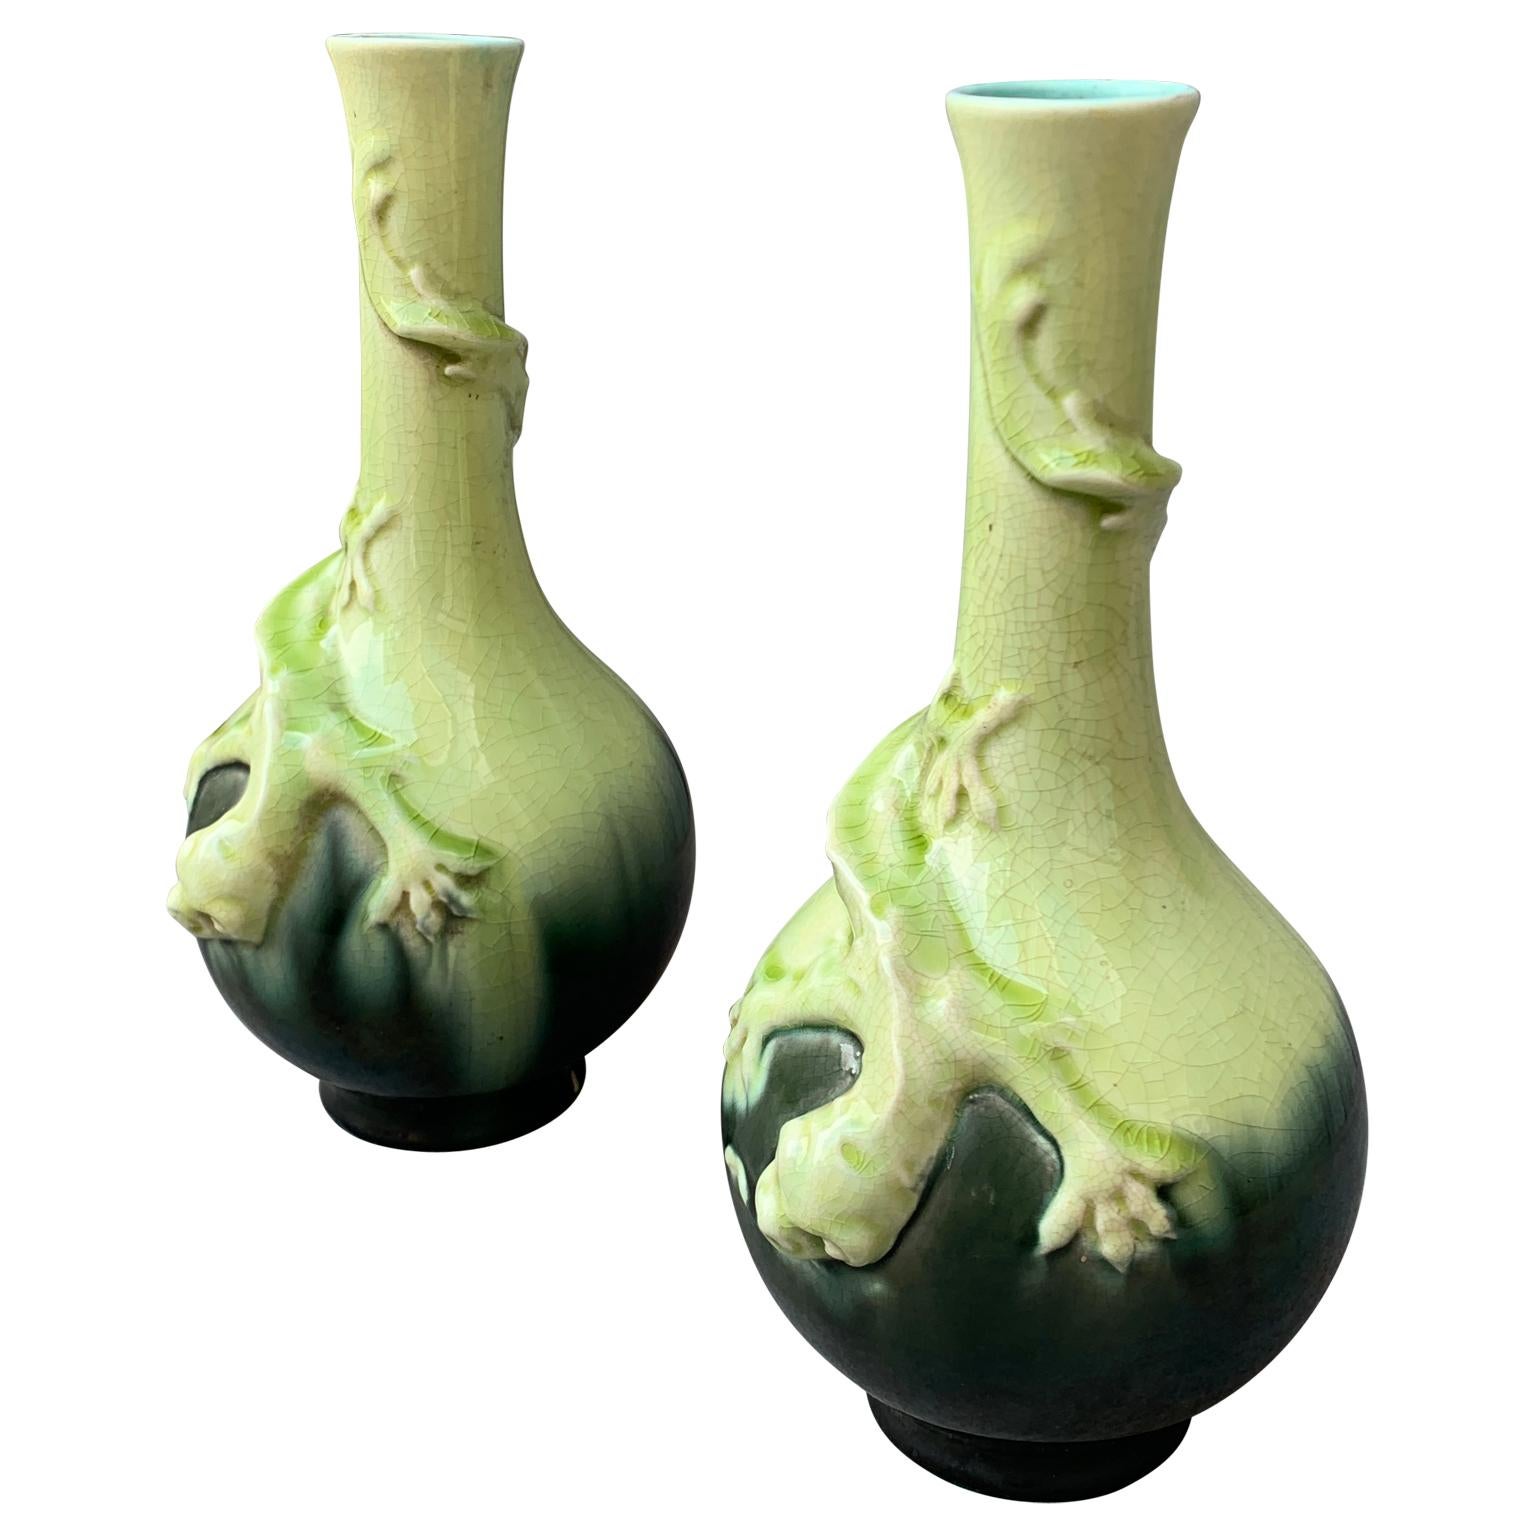 A pair of 19th Century Swedish Liberty Style Vases. Rörstrand porcelain factory in Sweden began producing in the 18th Century. This pair of Scandinavian majolica porcelain flower vases are decorated with a lizard hunting an insect molded all around